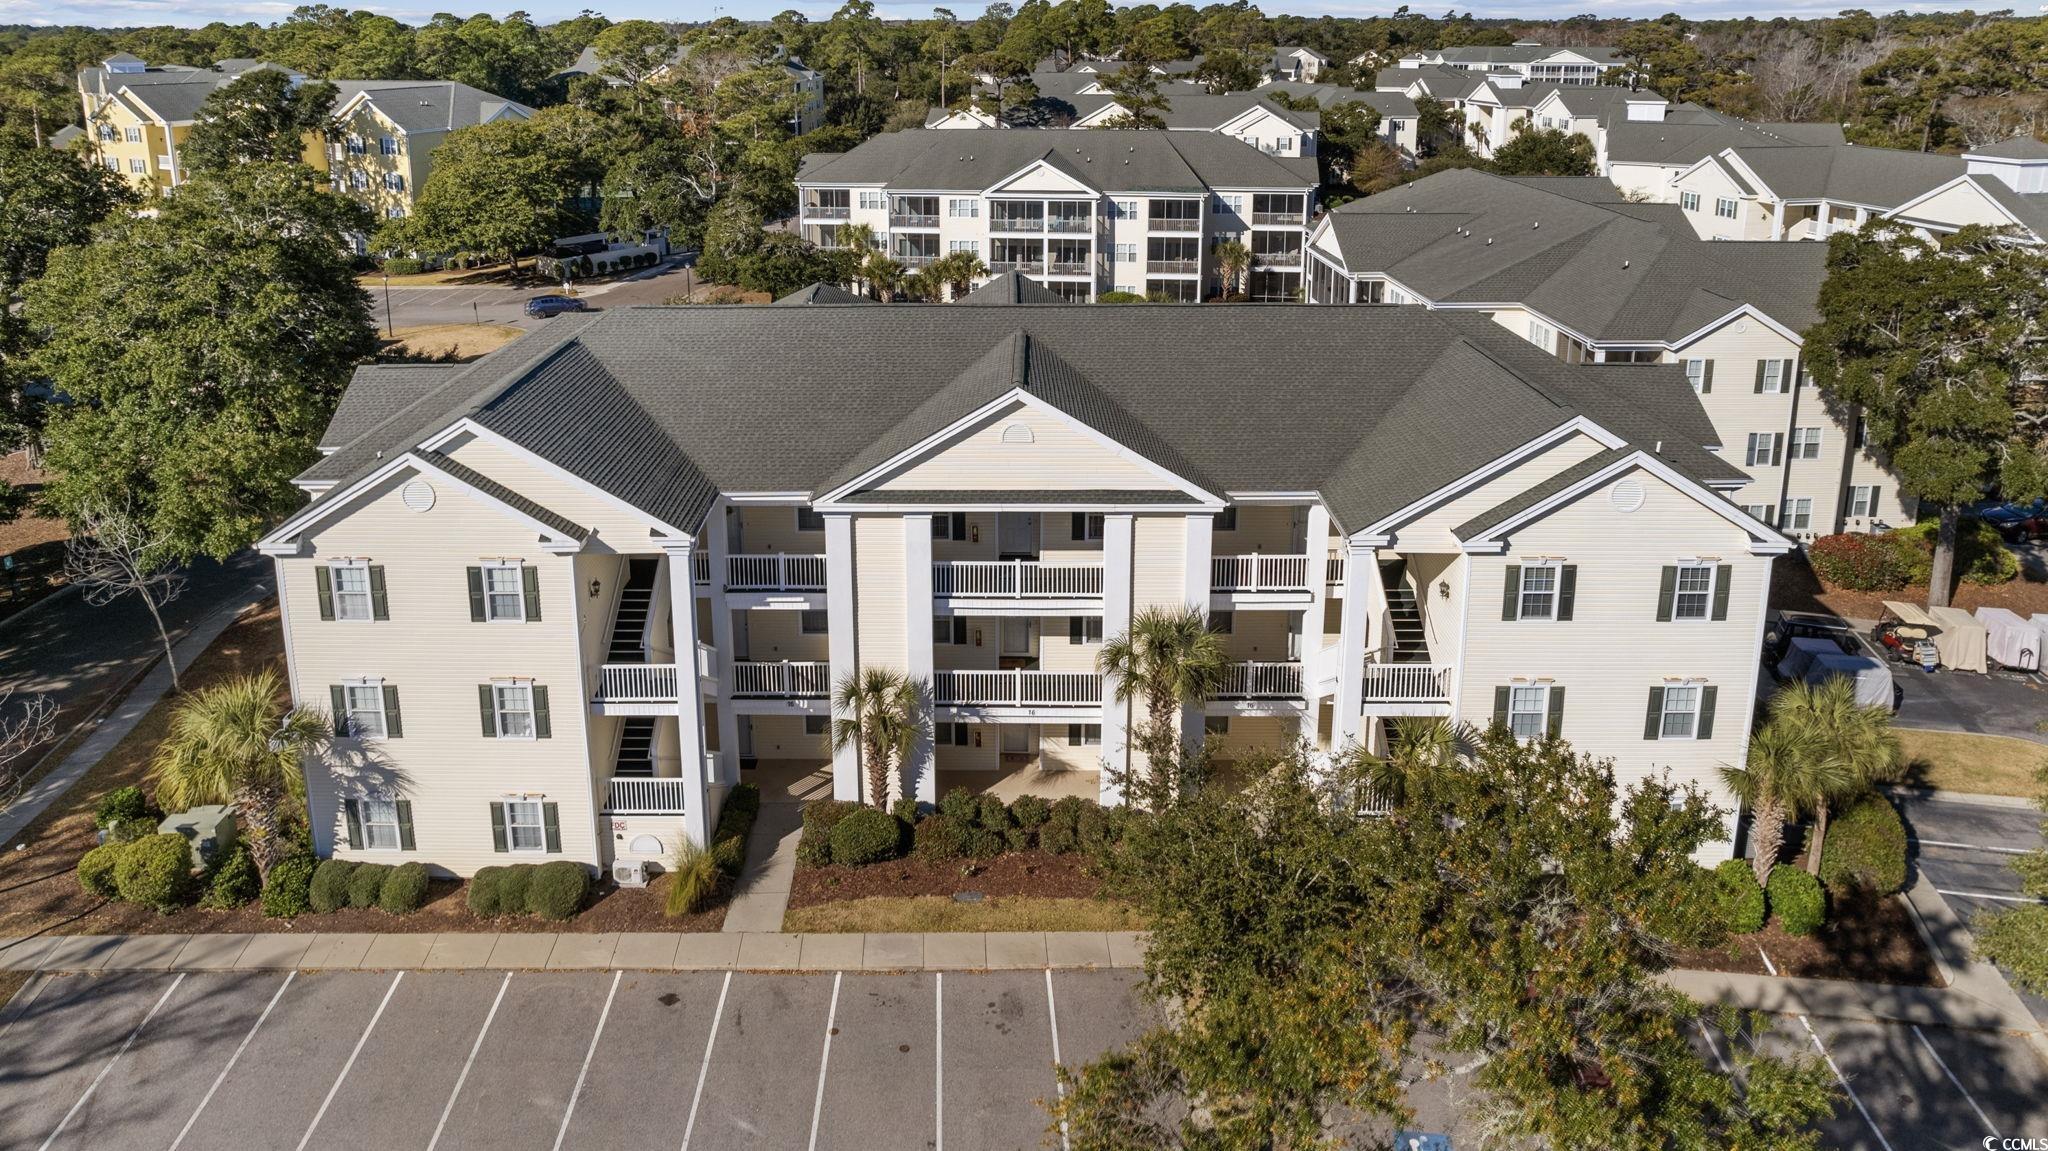 this 3br-2ba condo in gated ocean keyes is a fantastic opportunity to own a beach get-away or investment property in the highly desirable area of hillside drive in north myrtle beach. it is conveniently located just a short walk or golf cart ride to the beach. the condo is in pristine condition and ready to move in, as it comes fully furnished.  as you enter through the front door, you will find the third bedroom on the right with french doors. this room can be utilized as a bedroom, an office, or a tv room.  the kitchen has been tastefully upgraded with beautiful granite countertops.  the open and airy floor plan of this condo is filled with natural light, thanks to the double sliders that lead to a spacious balcony overlooking the pool. the master suite is generously sized, featuring a walk-in closet, a tray ceiling with a fan, and sliding doors that also open to the balcony.  one thing that sets this condo apart is the ample storage space it offers, which is unusual for a condo. there are two smaller storage closets next to the front door, as well as an additional large storage unit on the first floor that is deeded in the sale.  ocean keyes offers an array of amazing amenities, including six community pools and hot tubs, two kiddie pools, tennis courts, a fitness center, a game room, charcoal and gas grills, picnic areas, walking trails and bike paths. golf carts are allowed within the community.  situated in the heart of north myrtle beach, ocean keyes is conveniently located just two blocks away from main street. here, you can enjoy great entertainment options and a variety of restaurants. don't miss out on this incredible opportunity to own a piece of paradise!